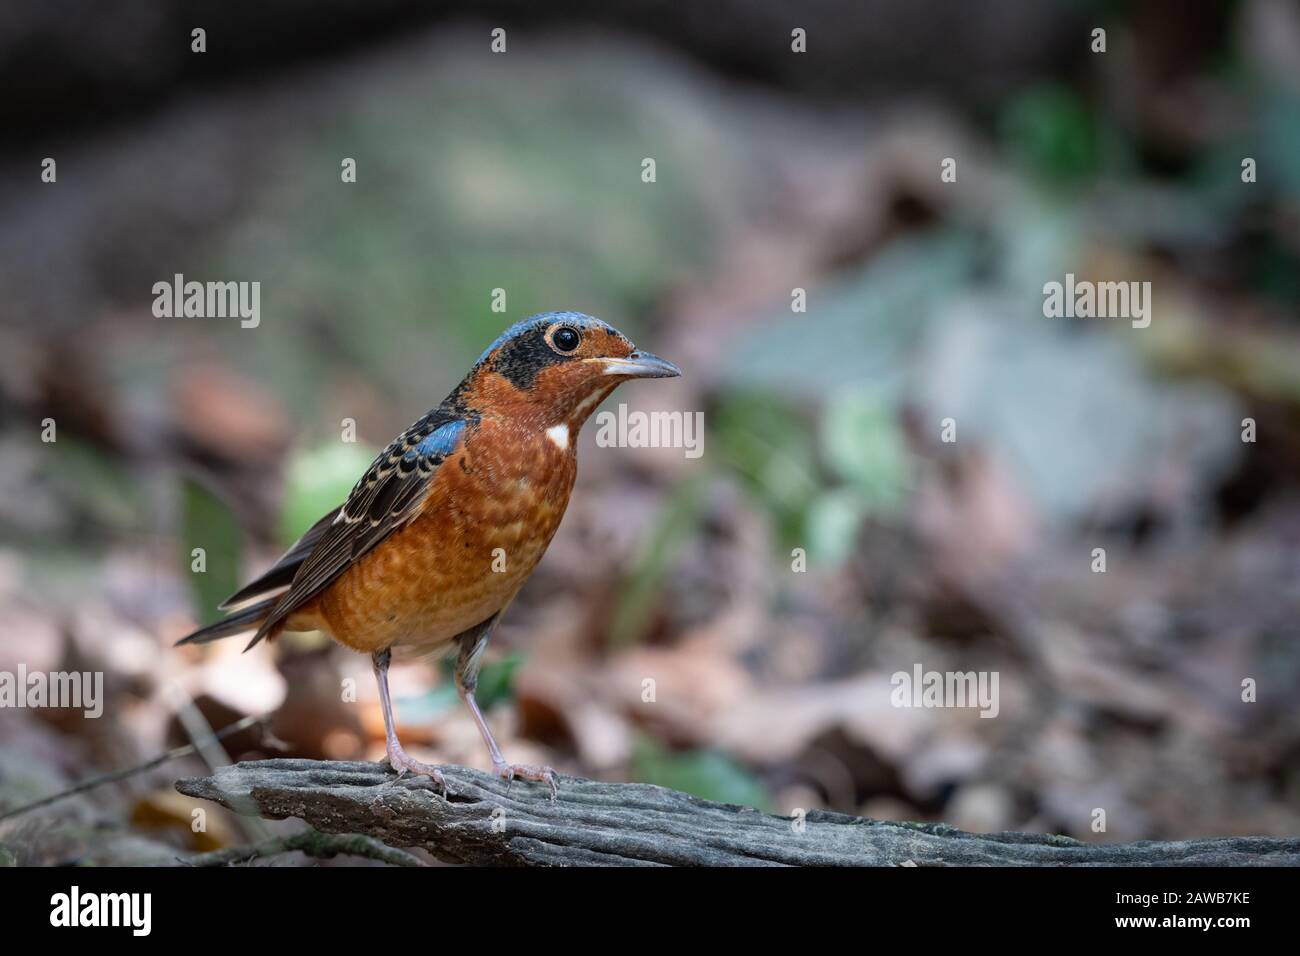 The white-throated rock thrush (Monticola gularis) is a species of bird in the family Muscicapidae of the order Passeriformes. Stock Photo